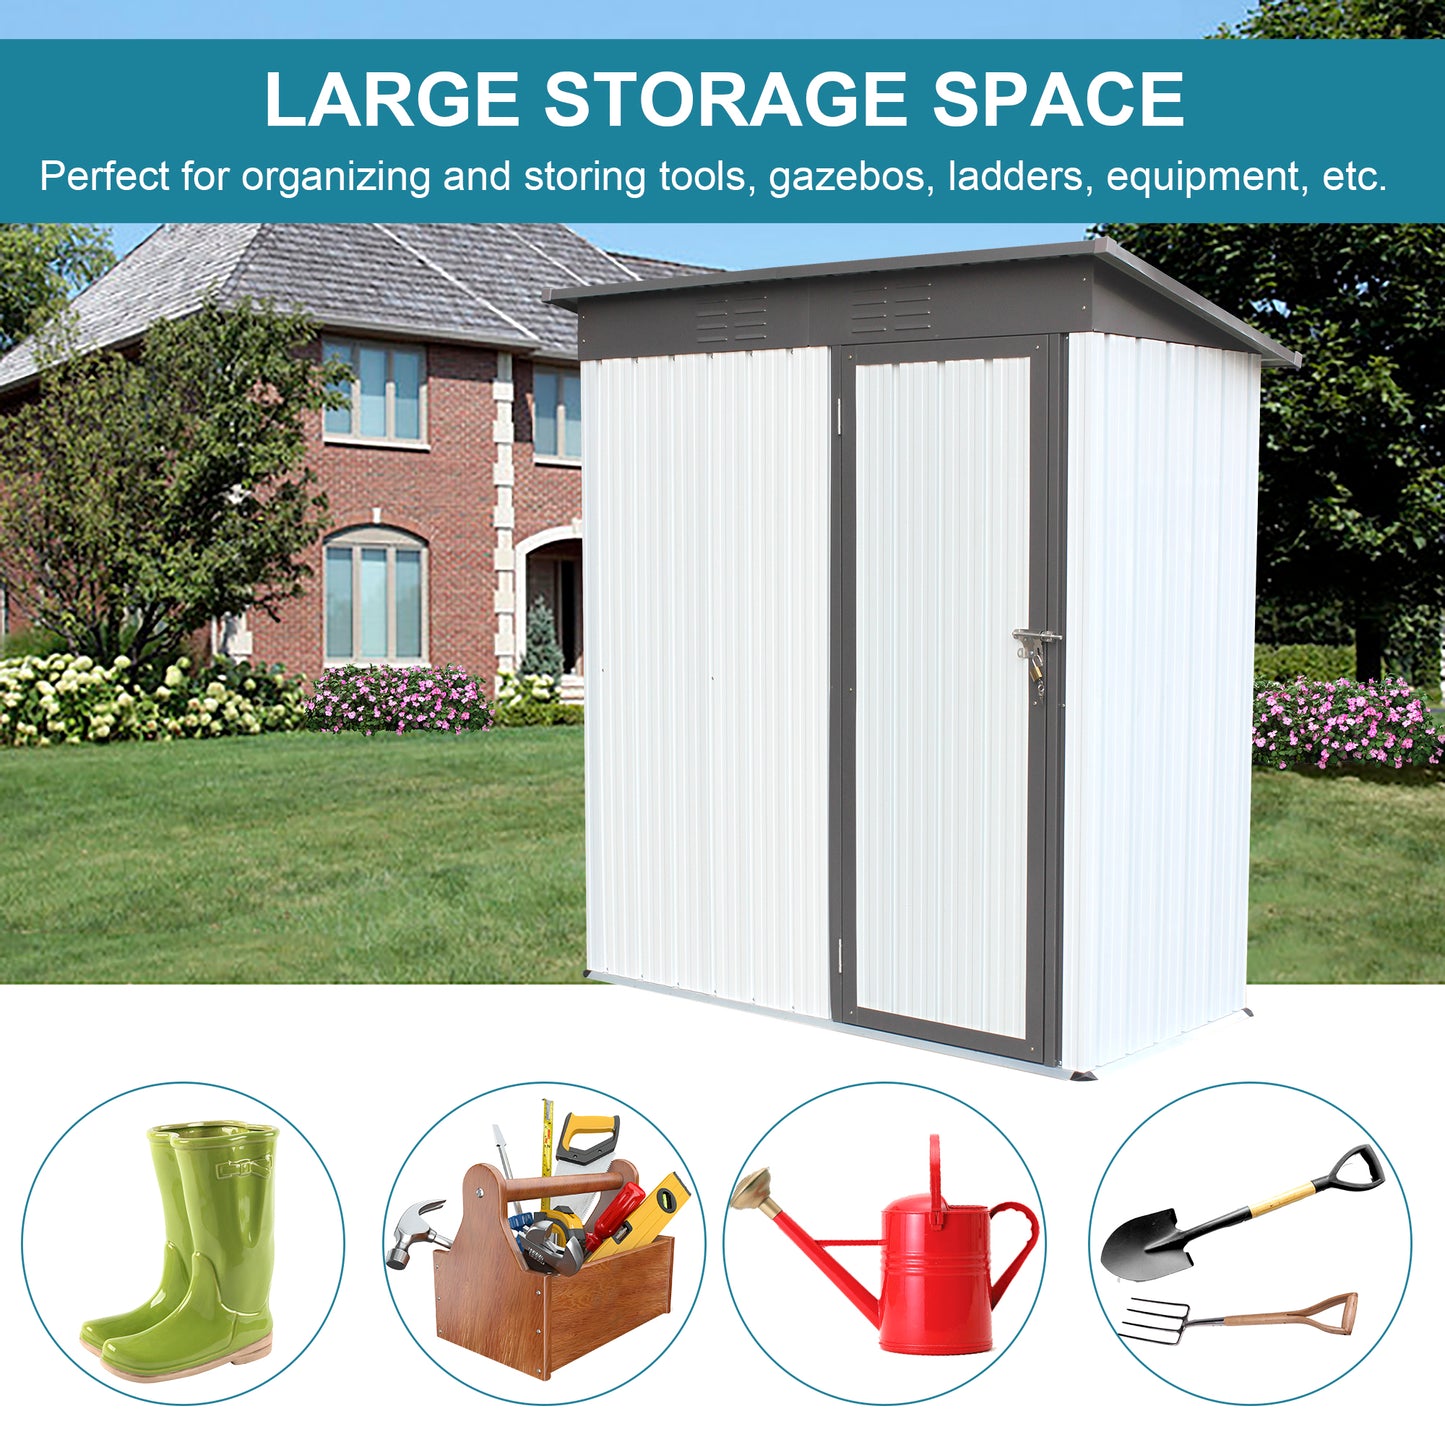 Backyard Storage Shed, BTMWAY 5' x 3' Metal Outdoor Vertical Storage Shed, Waterproof Outdoor Storage Cabinet with Hinged Door, Padlock, Tool Shed Storage House for Backyard, Patio, Lawn